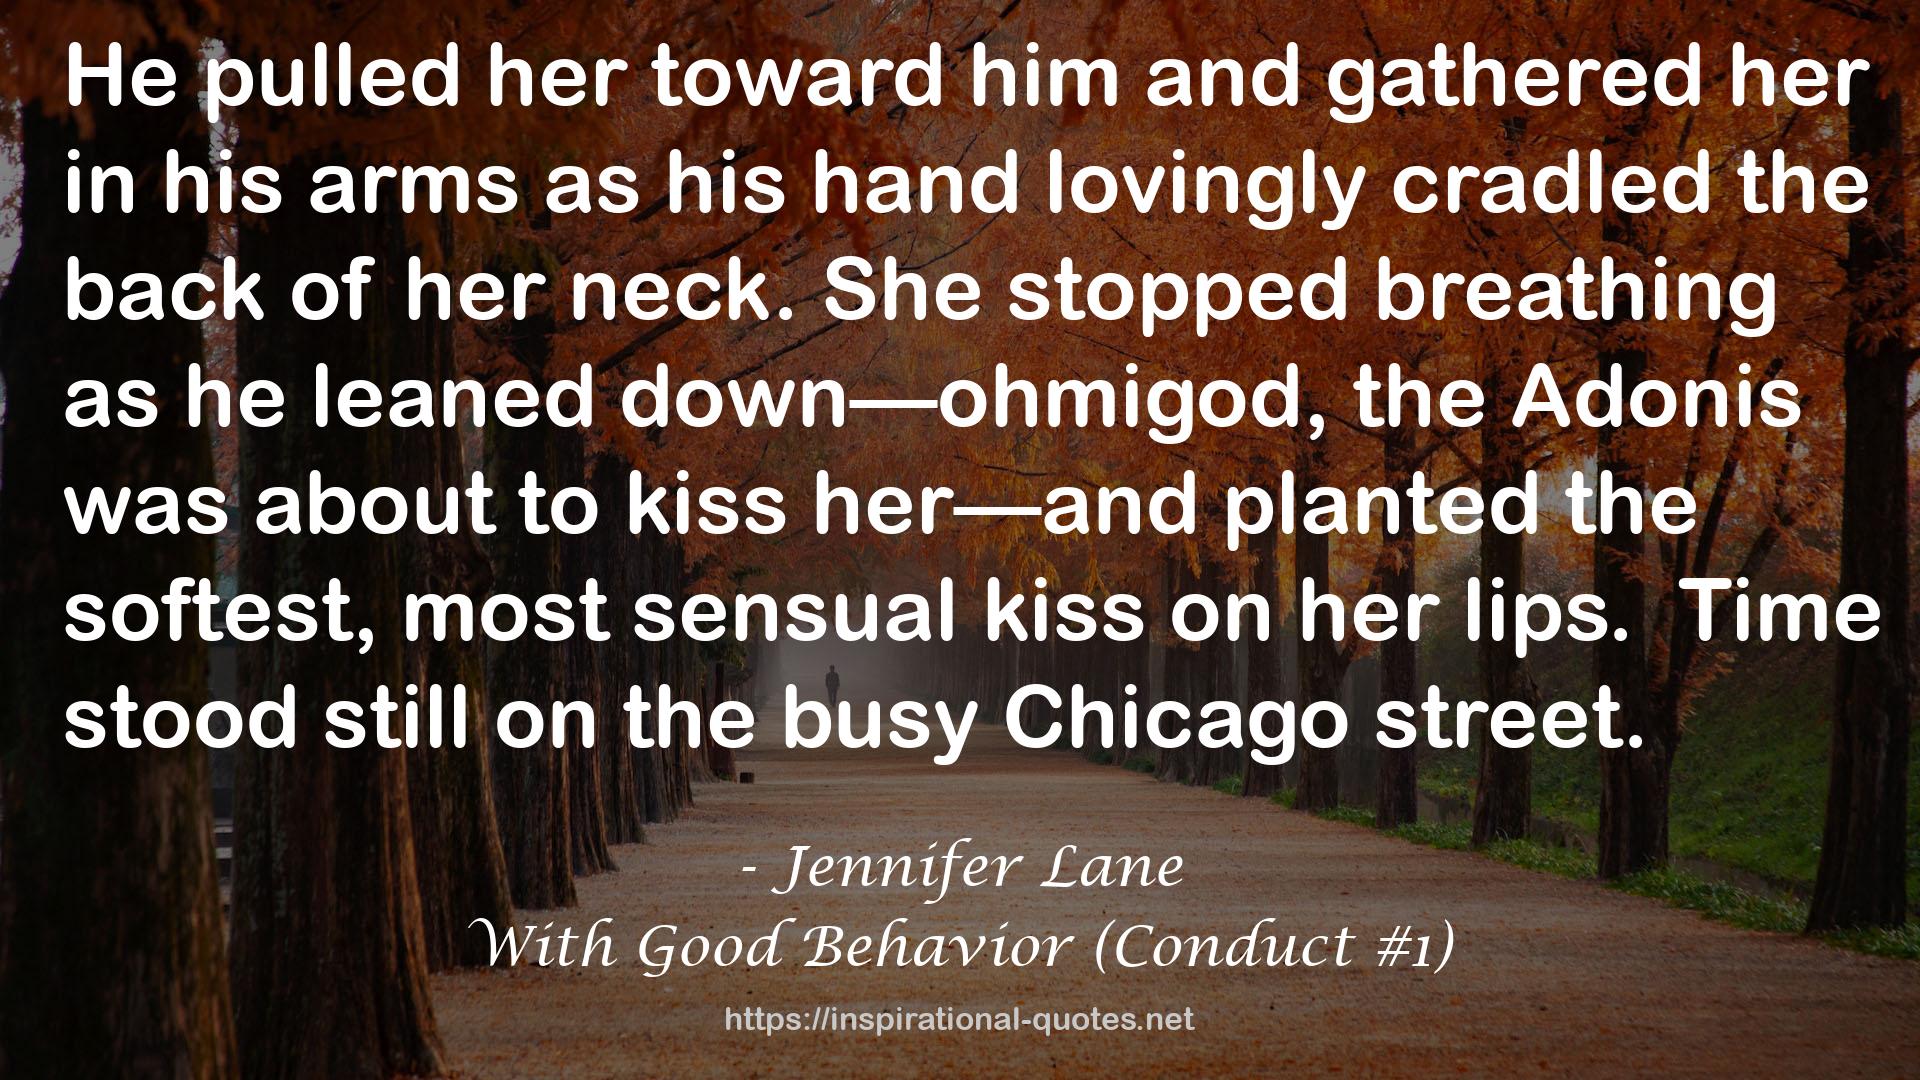 With Good Behavior (Conduct #1) QUOTES